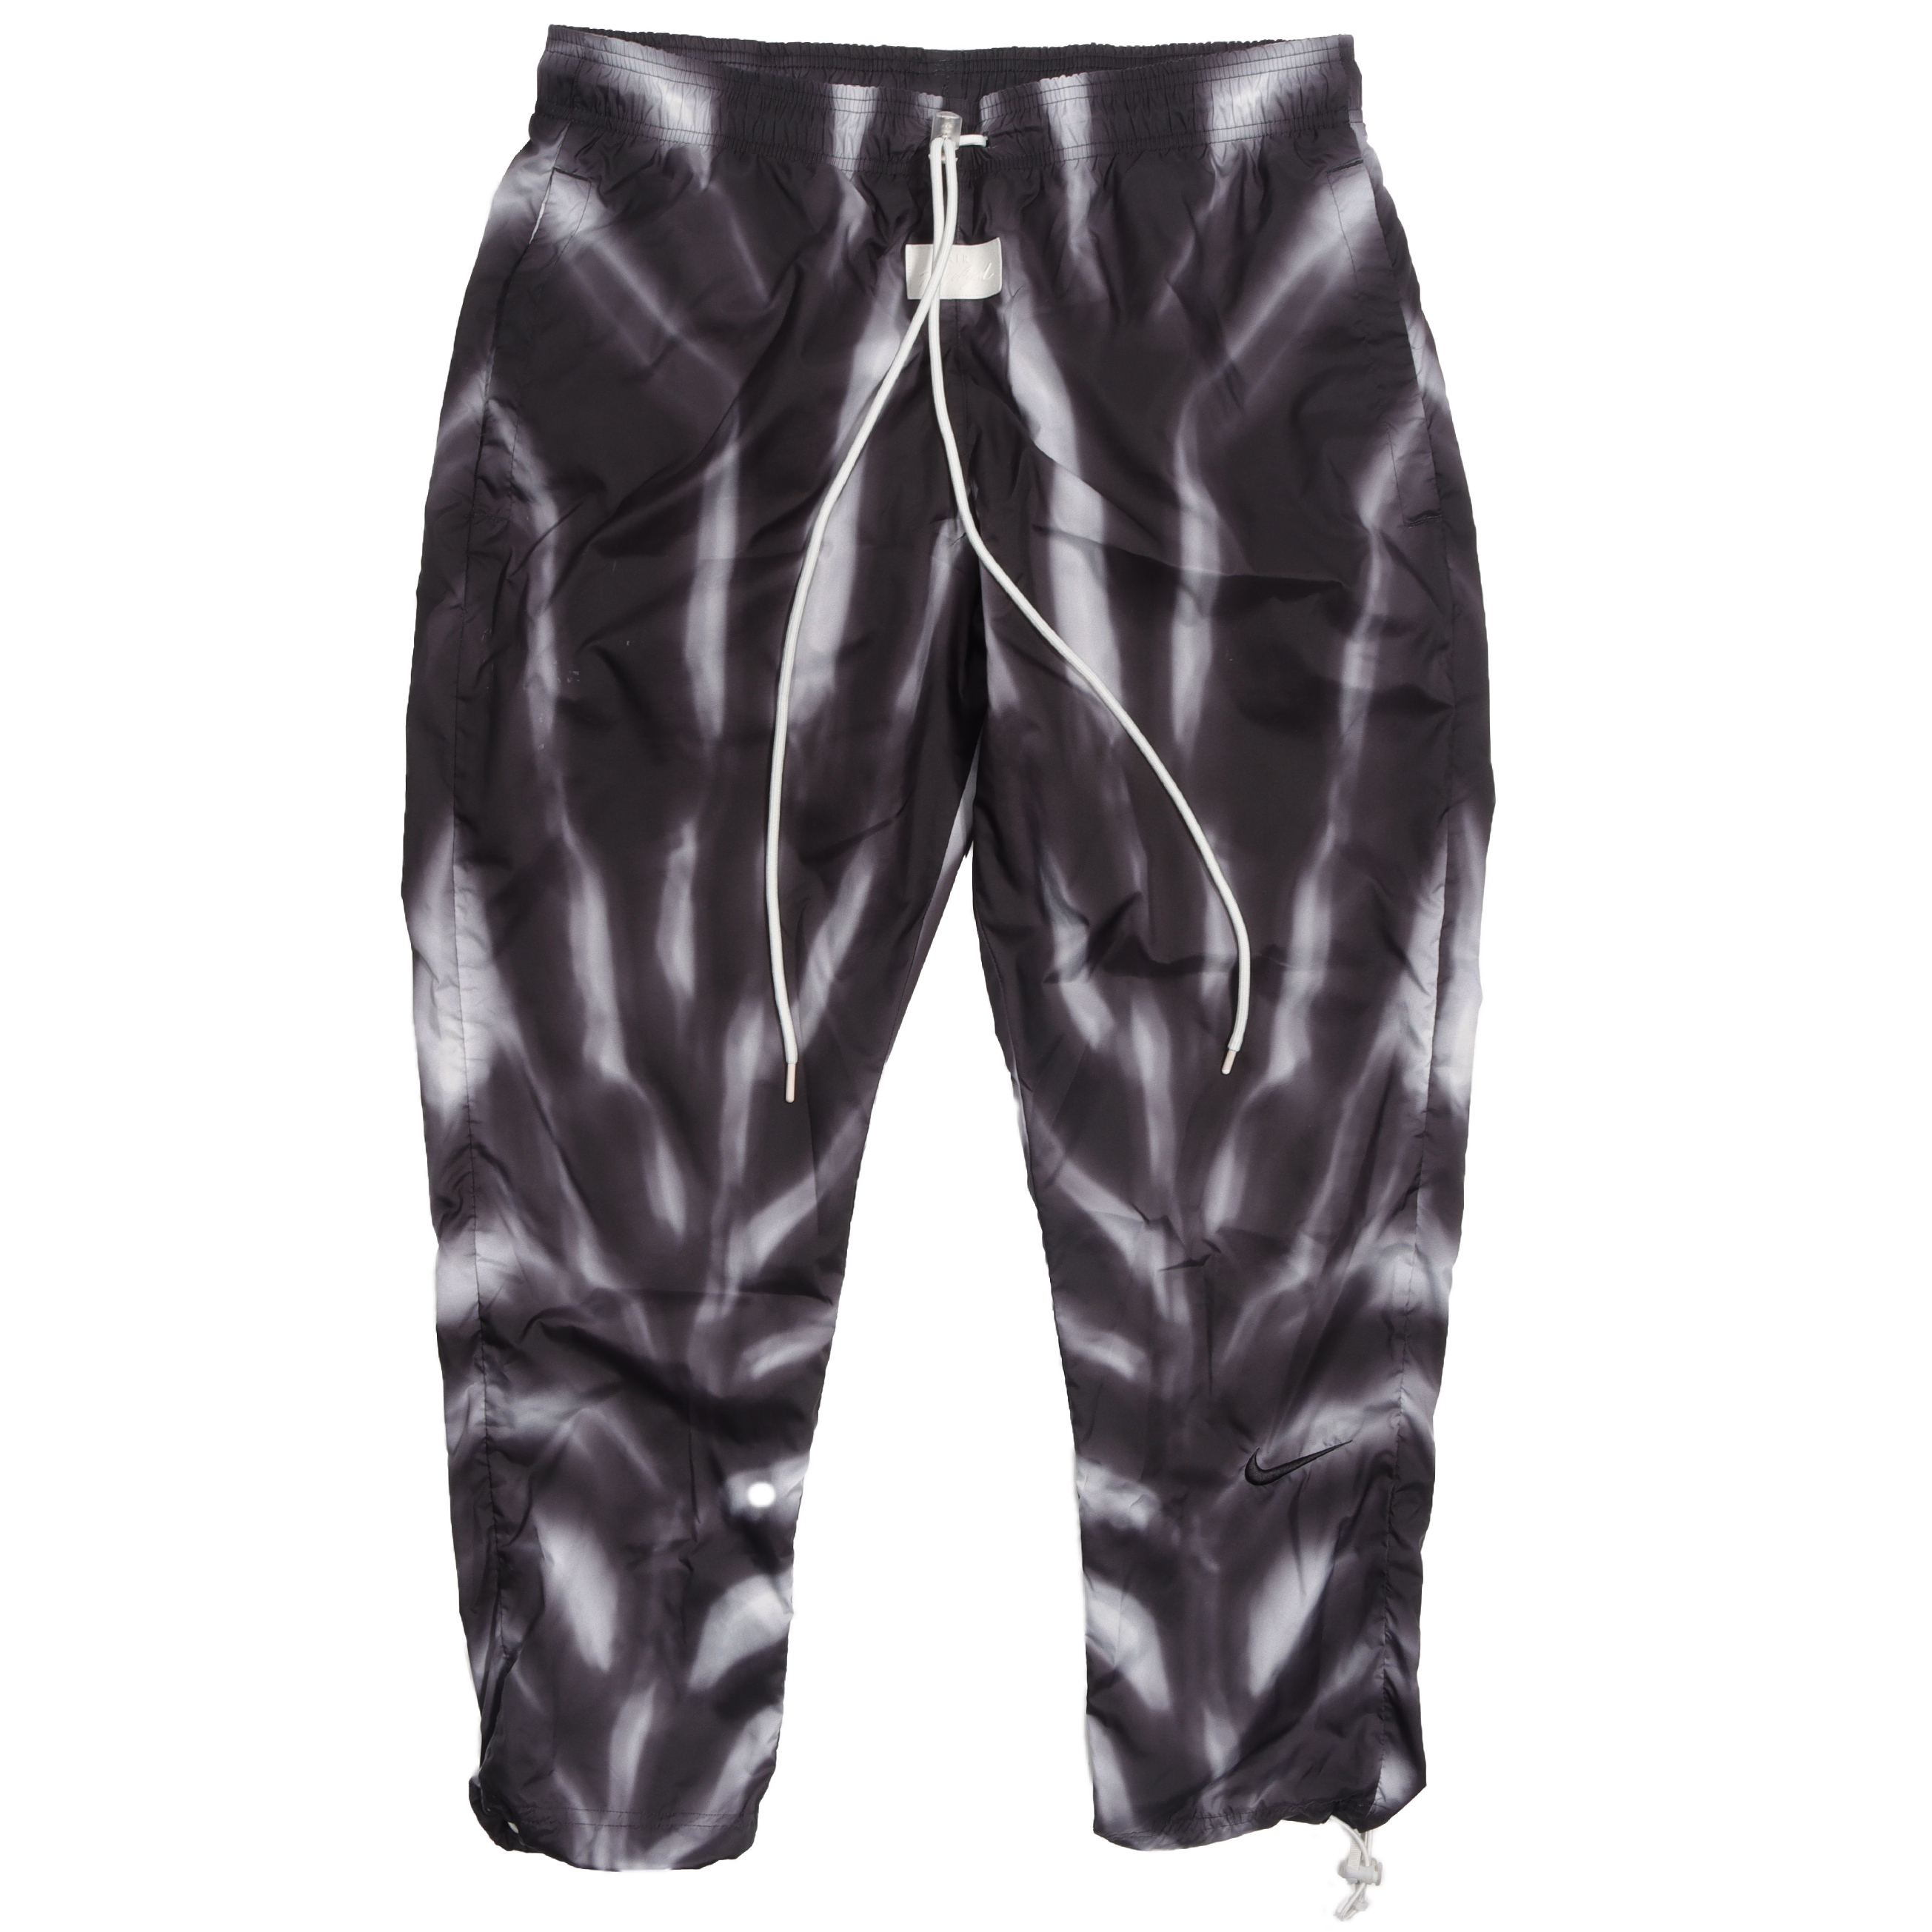 Fear of God Allover Print Pants